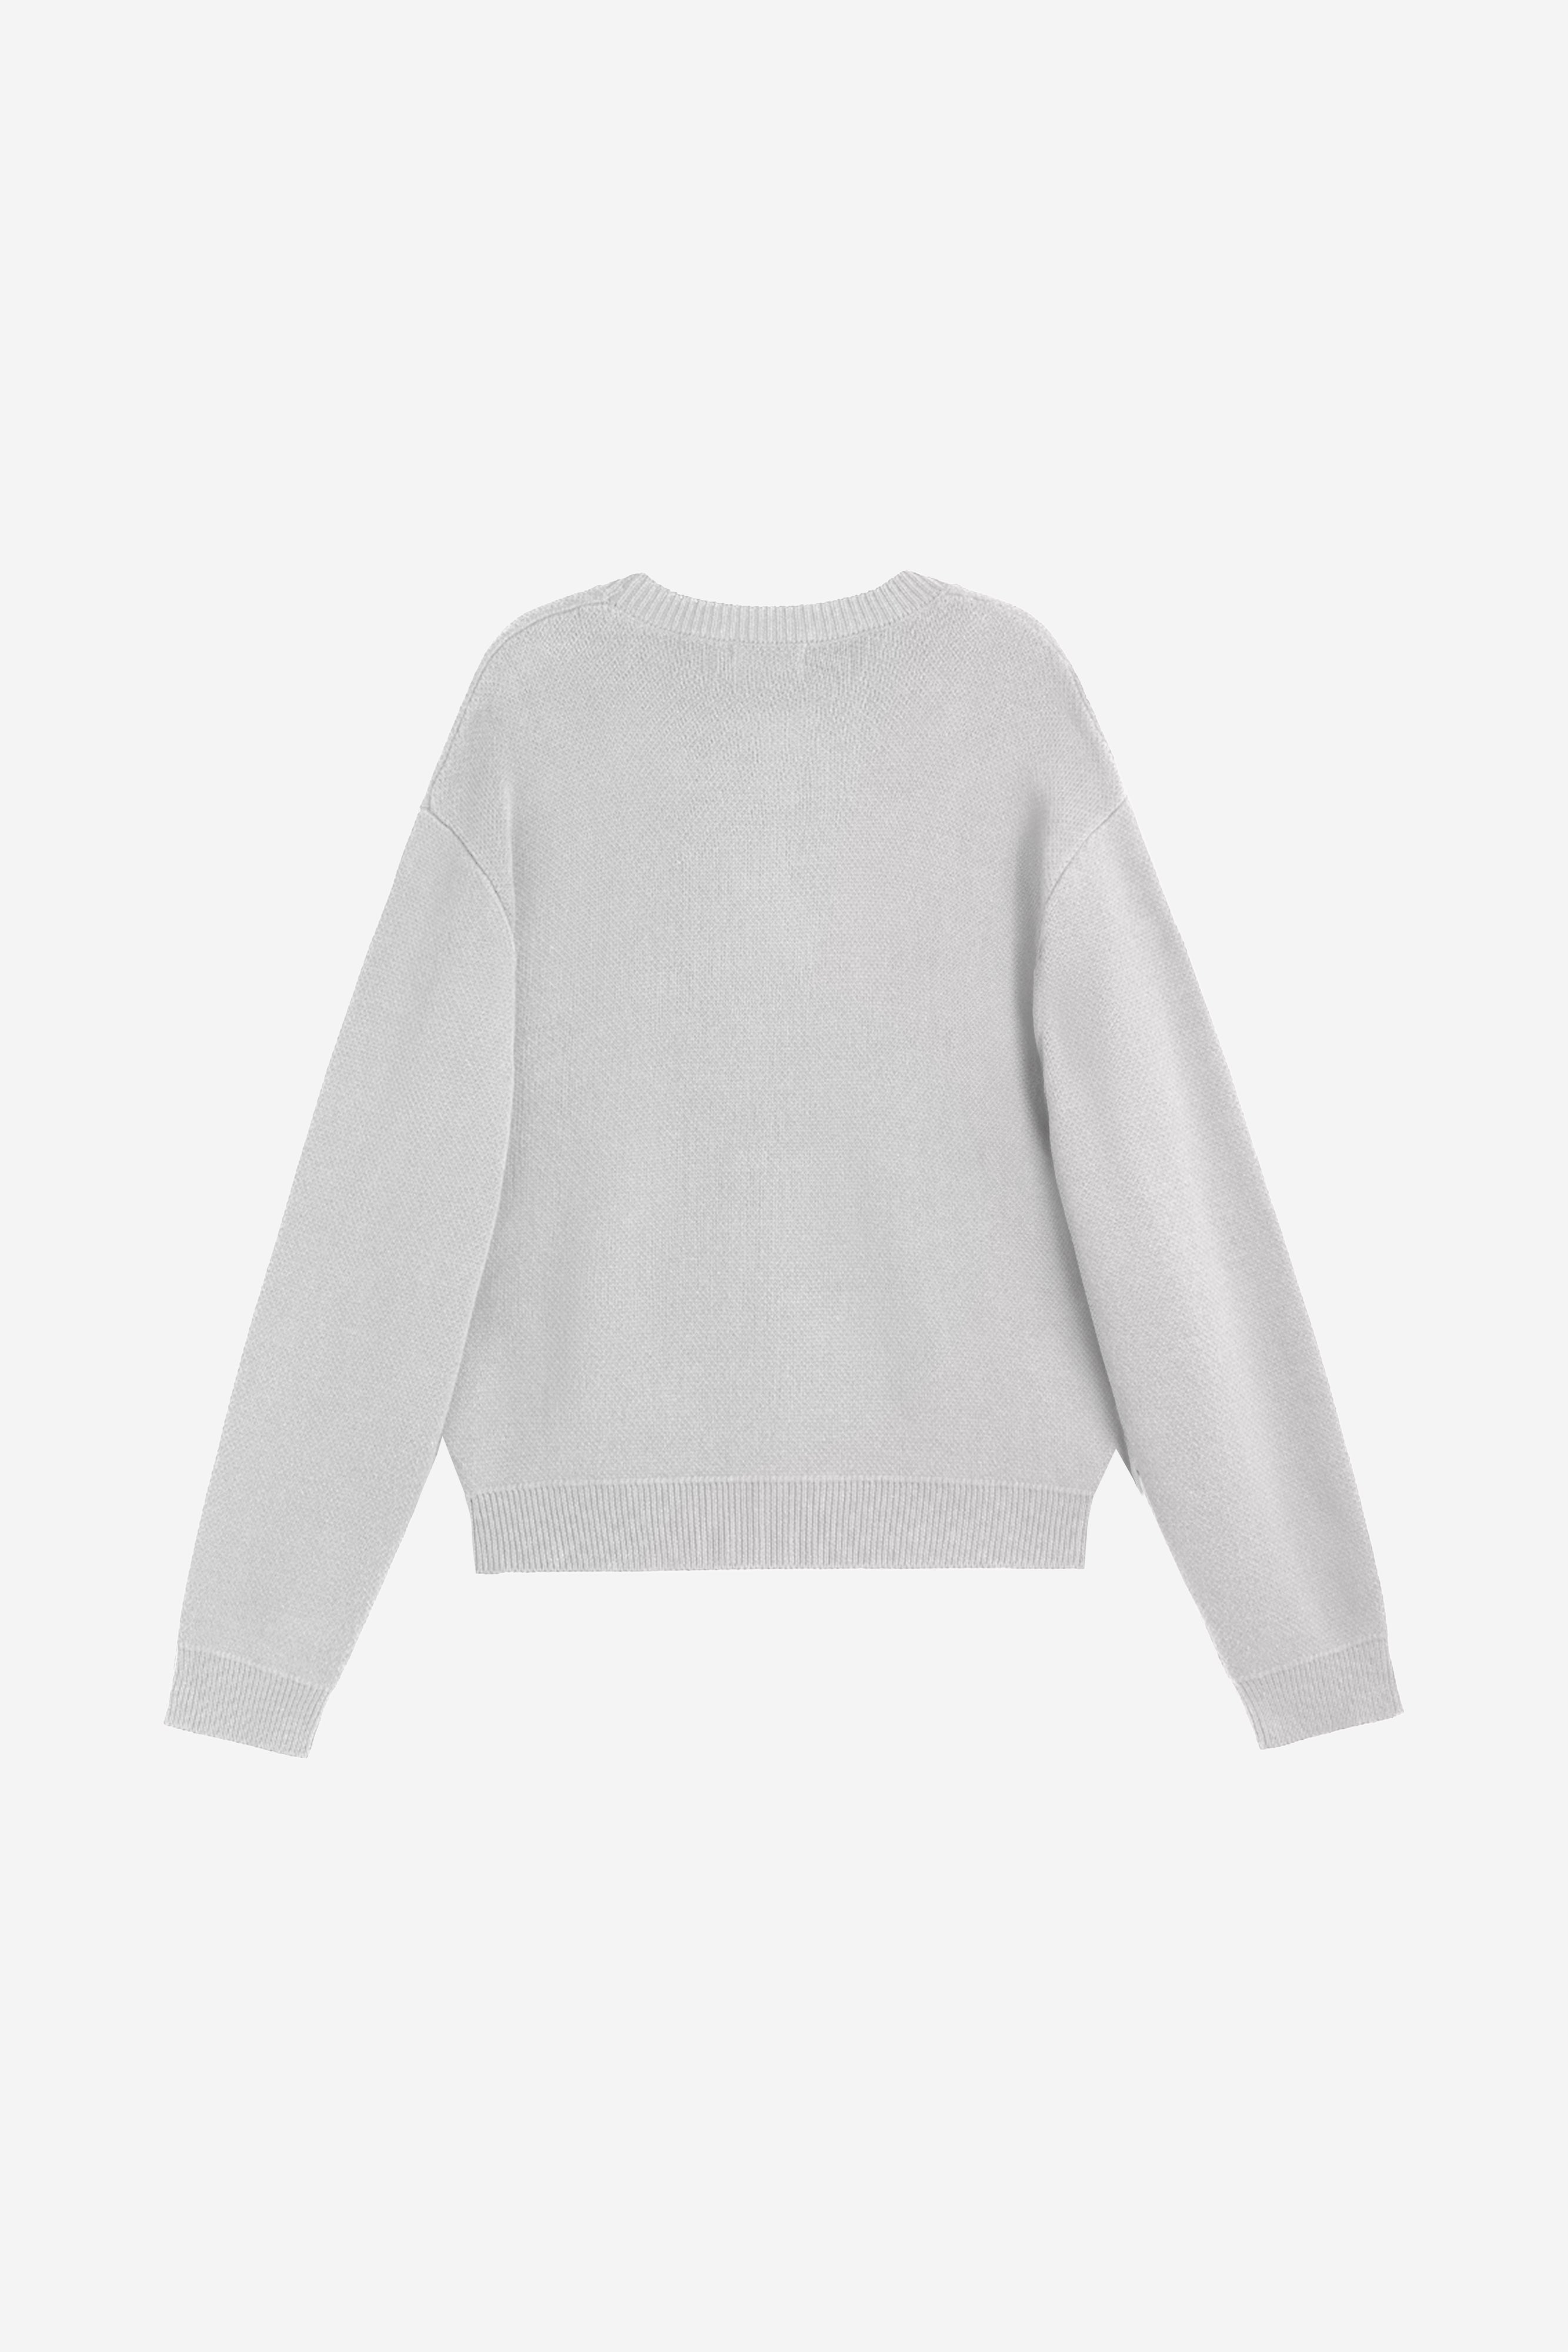 VALENTINE'S KNITTED SWEATER LIGHT GRAY